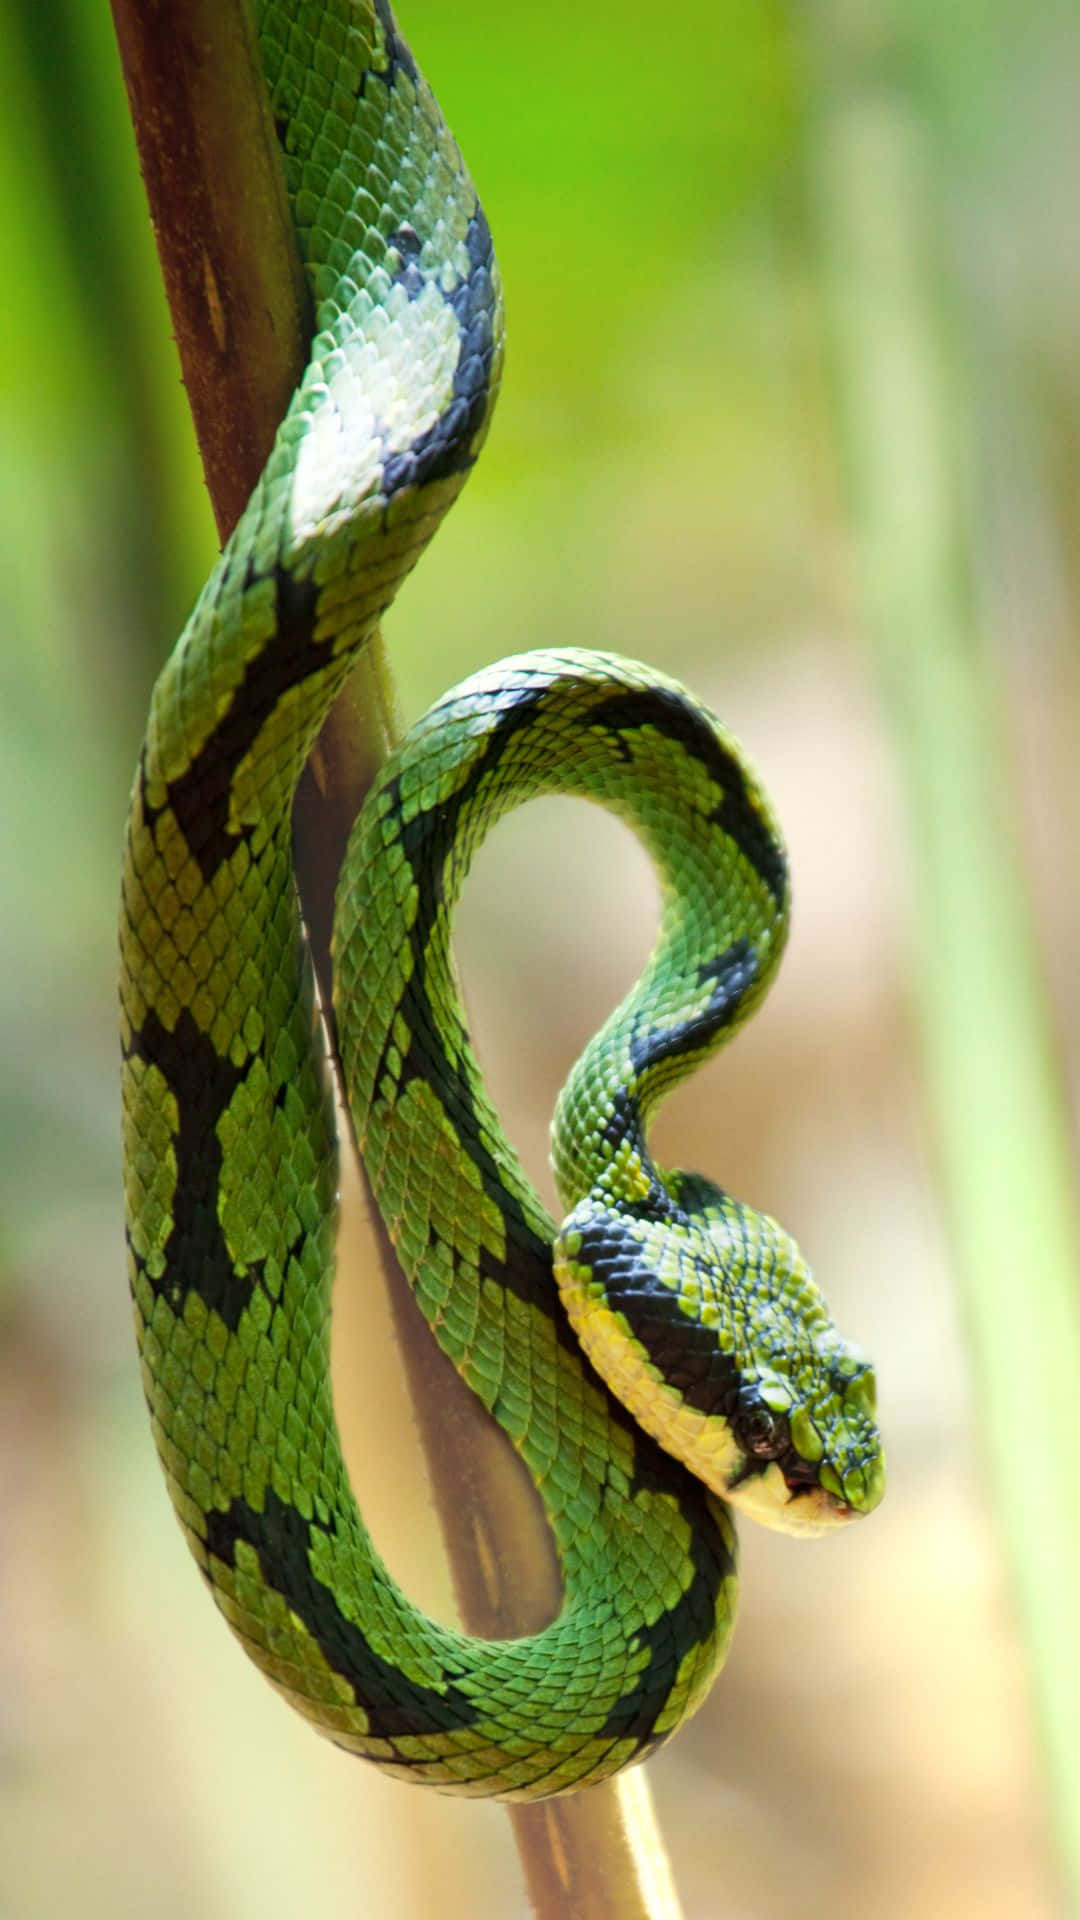 Lurking Beneath the Surface - An Up-Close Look at a Cool Snake Wallpaper